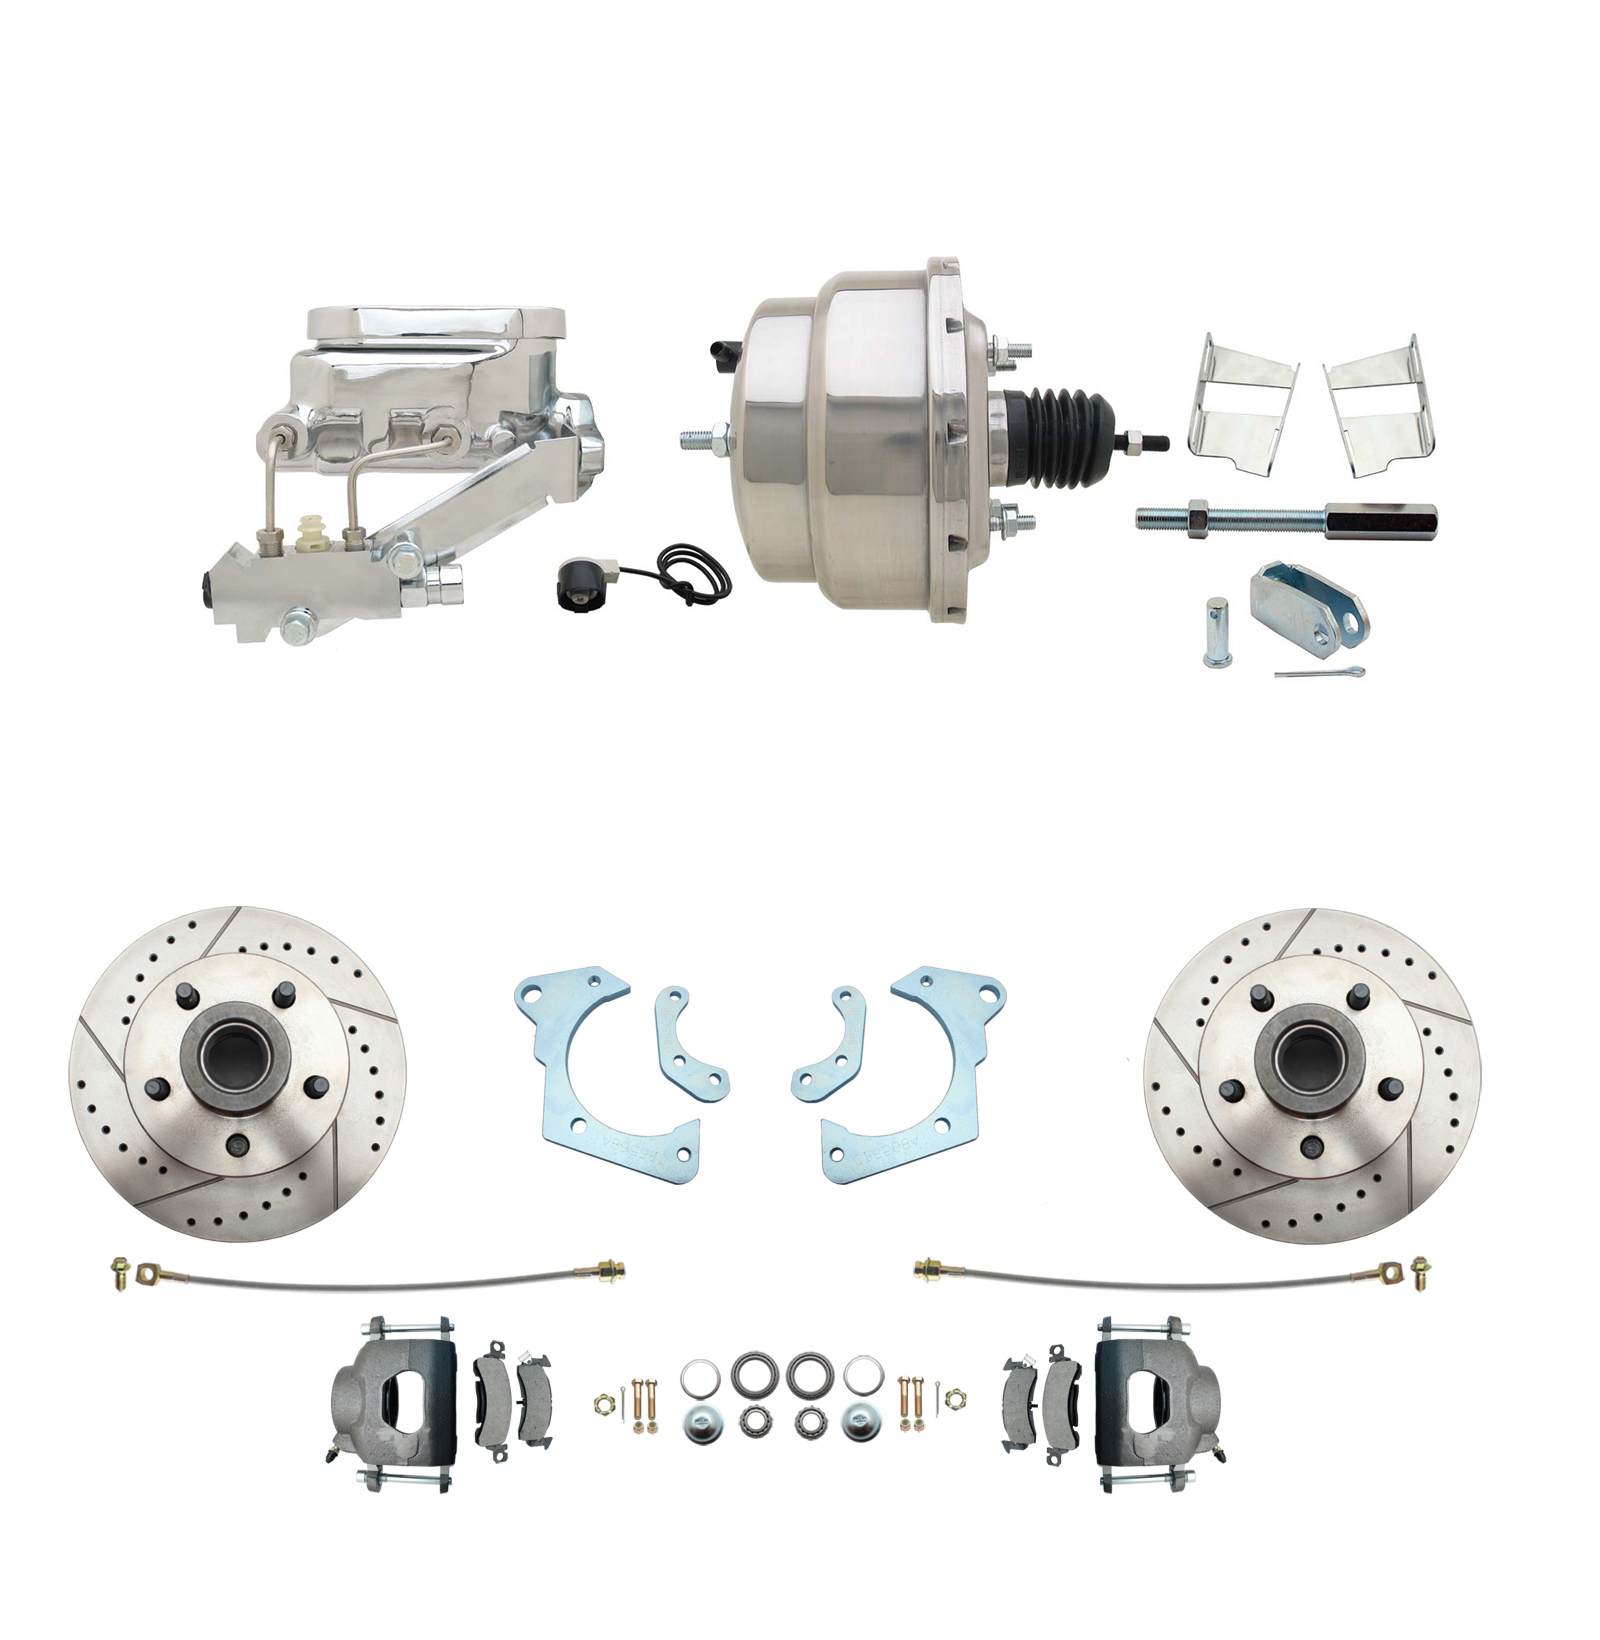 1965-1968 GM Full Size Disc Brake Kit Drilled/Slotted Rotors (Impala, Bel Air, Biscayne) & 8 Dual Stainless Steel Booster Conversion Kit W/ Chrome Flat Top Master Cylinder Left Mount Disc/ Drum Proportioning Valve Kit